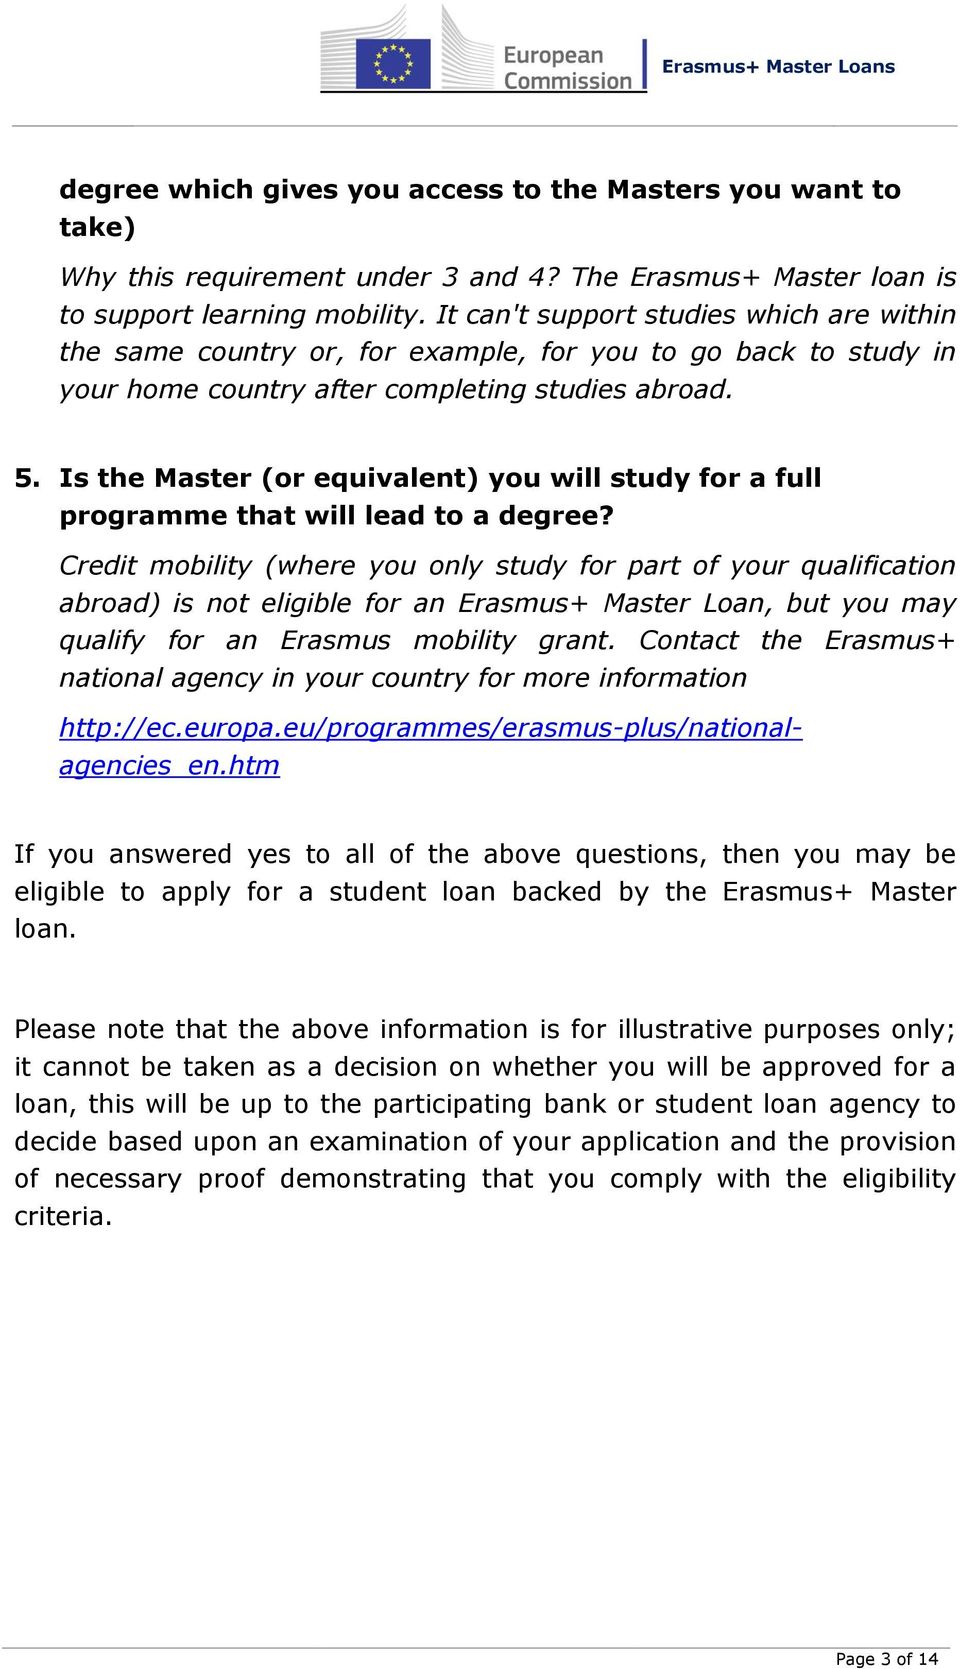 Is the Master (or equivalent) you will study for a full programme that will lead to a degree?